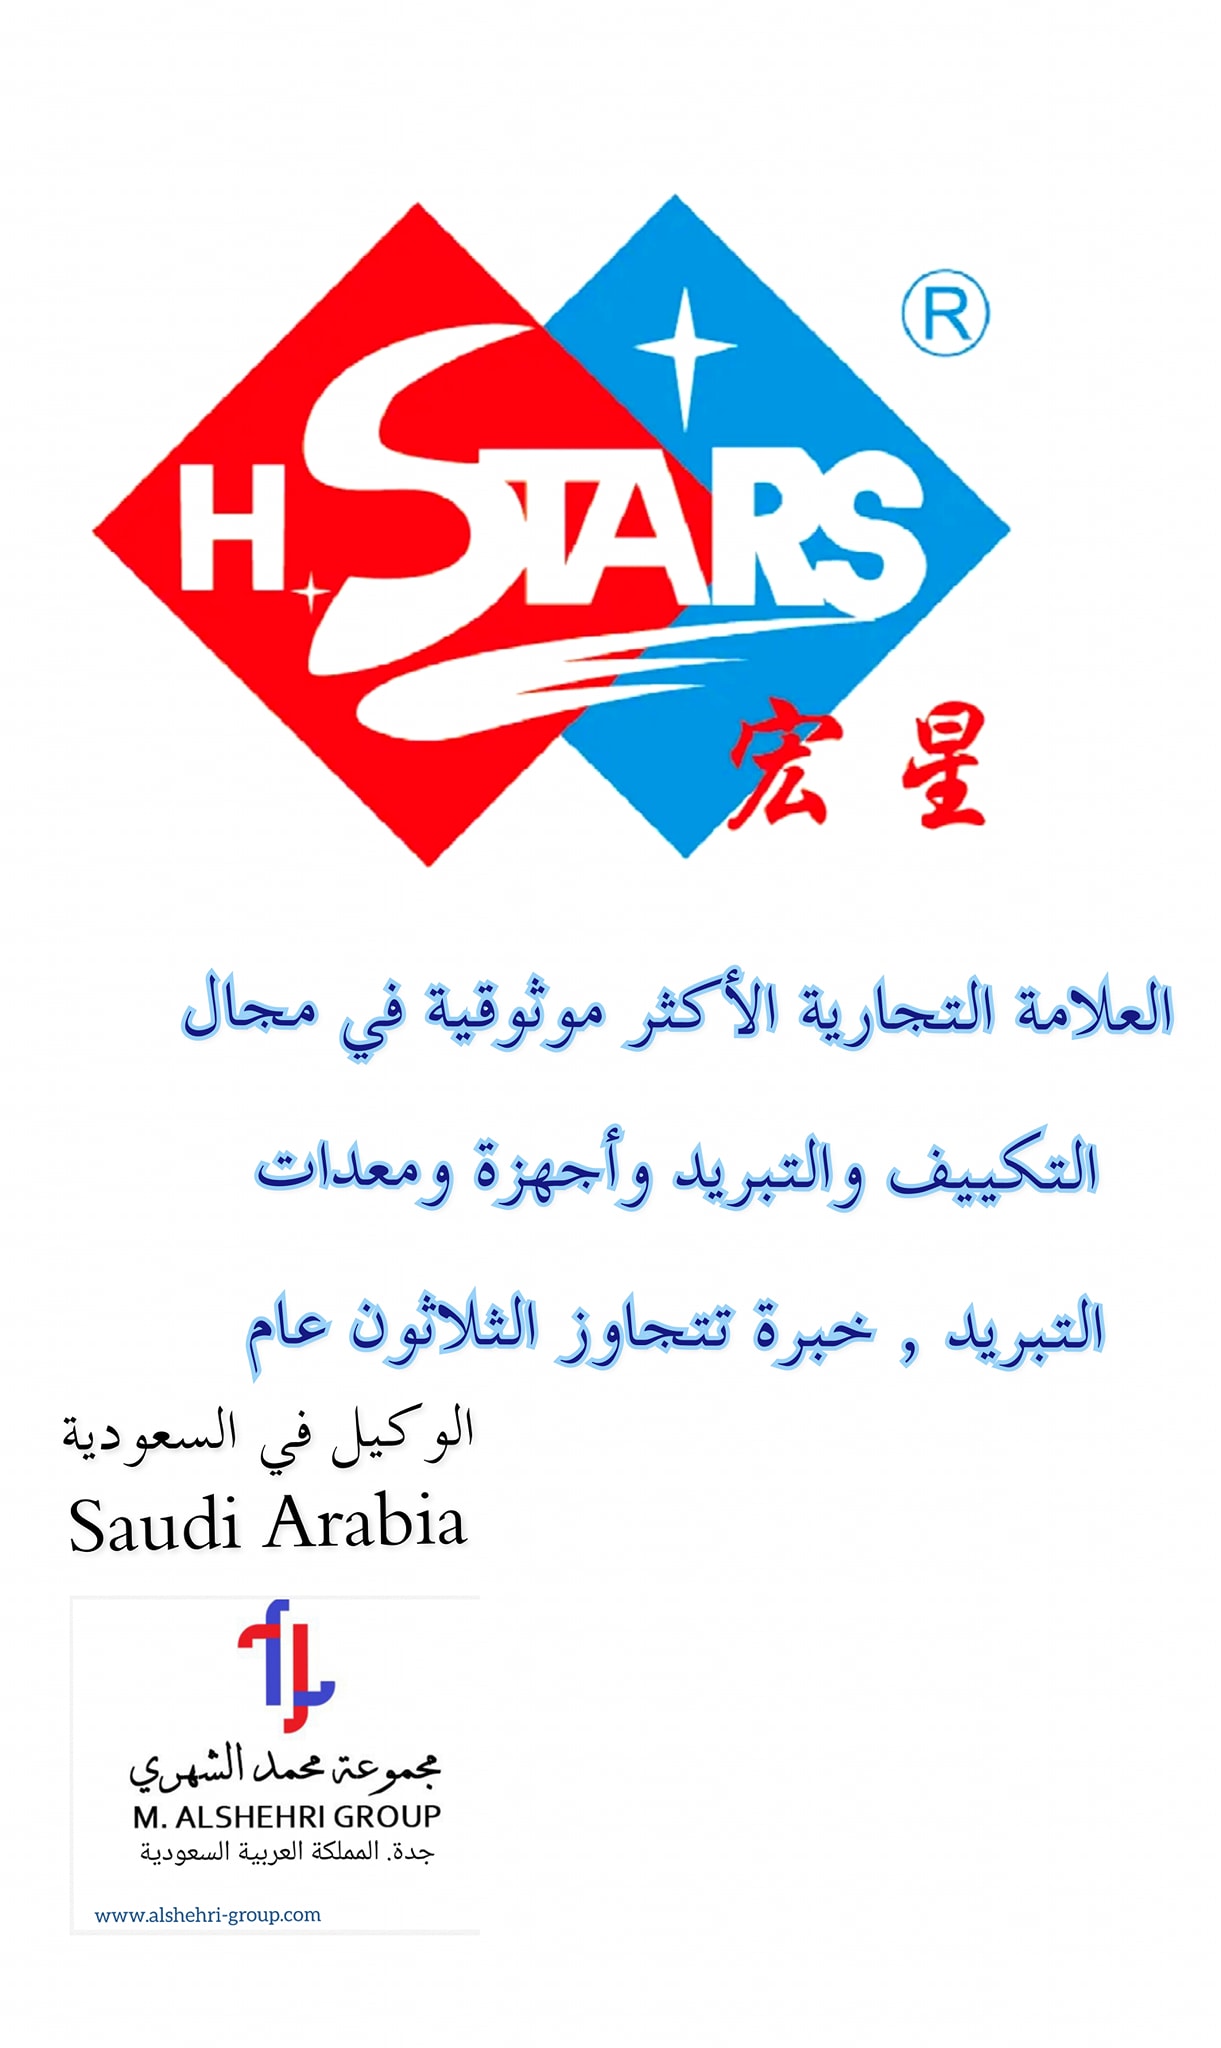 We Become Agent Of H.Stars Chiller Group In Saudi Arabia